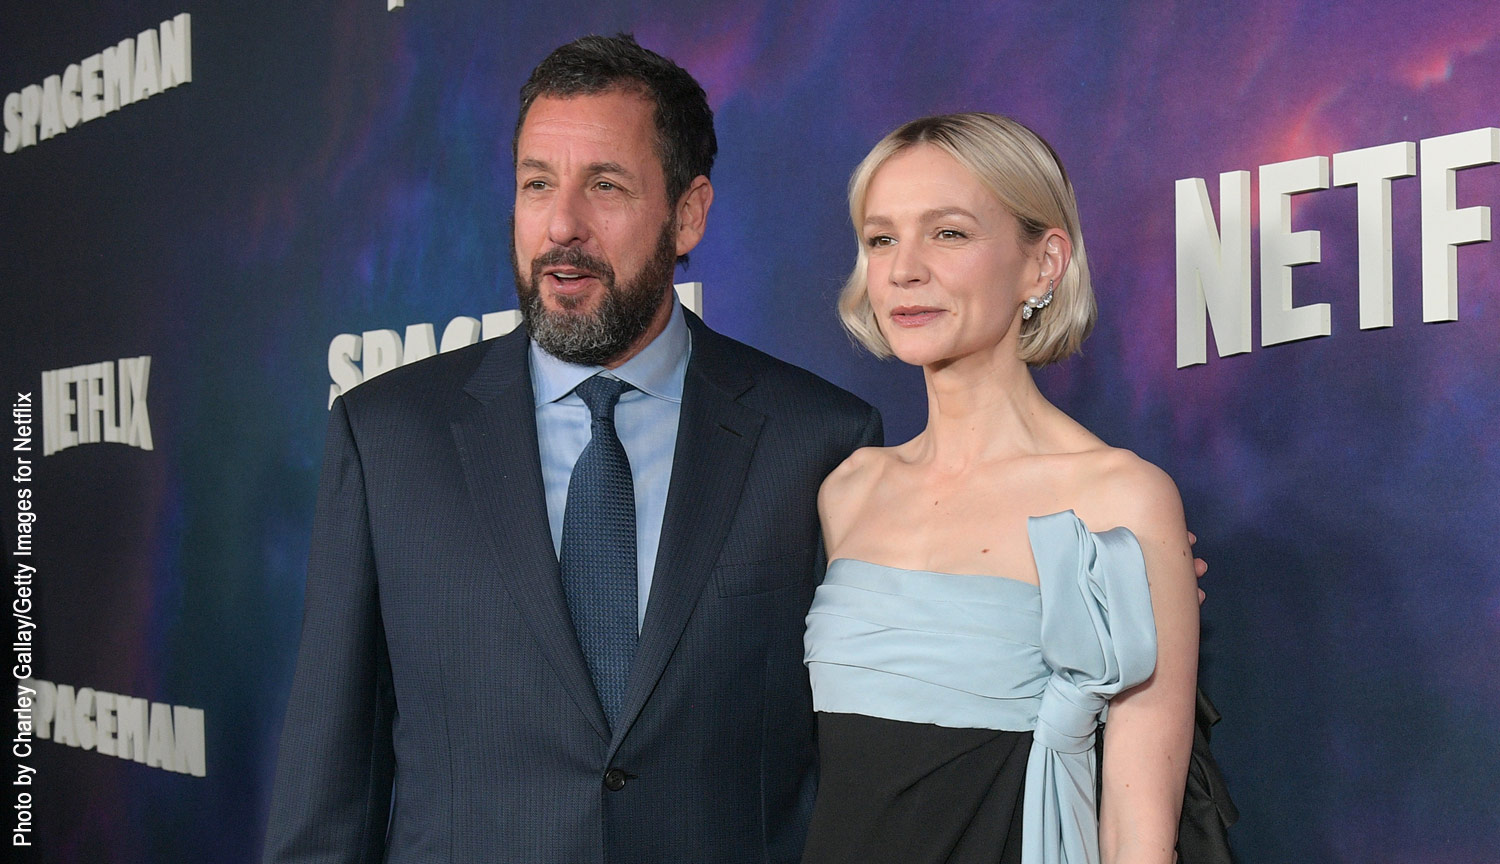 Adam Sandler and Carey Mulligan on the red carpet for Spaceman